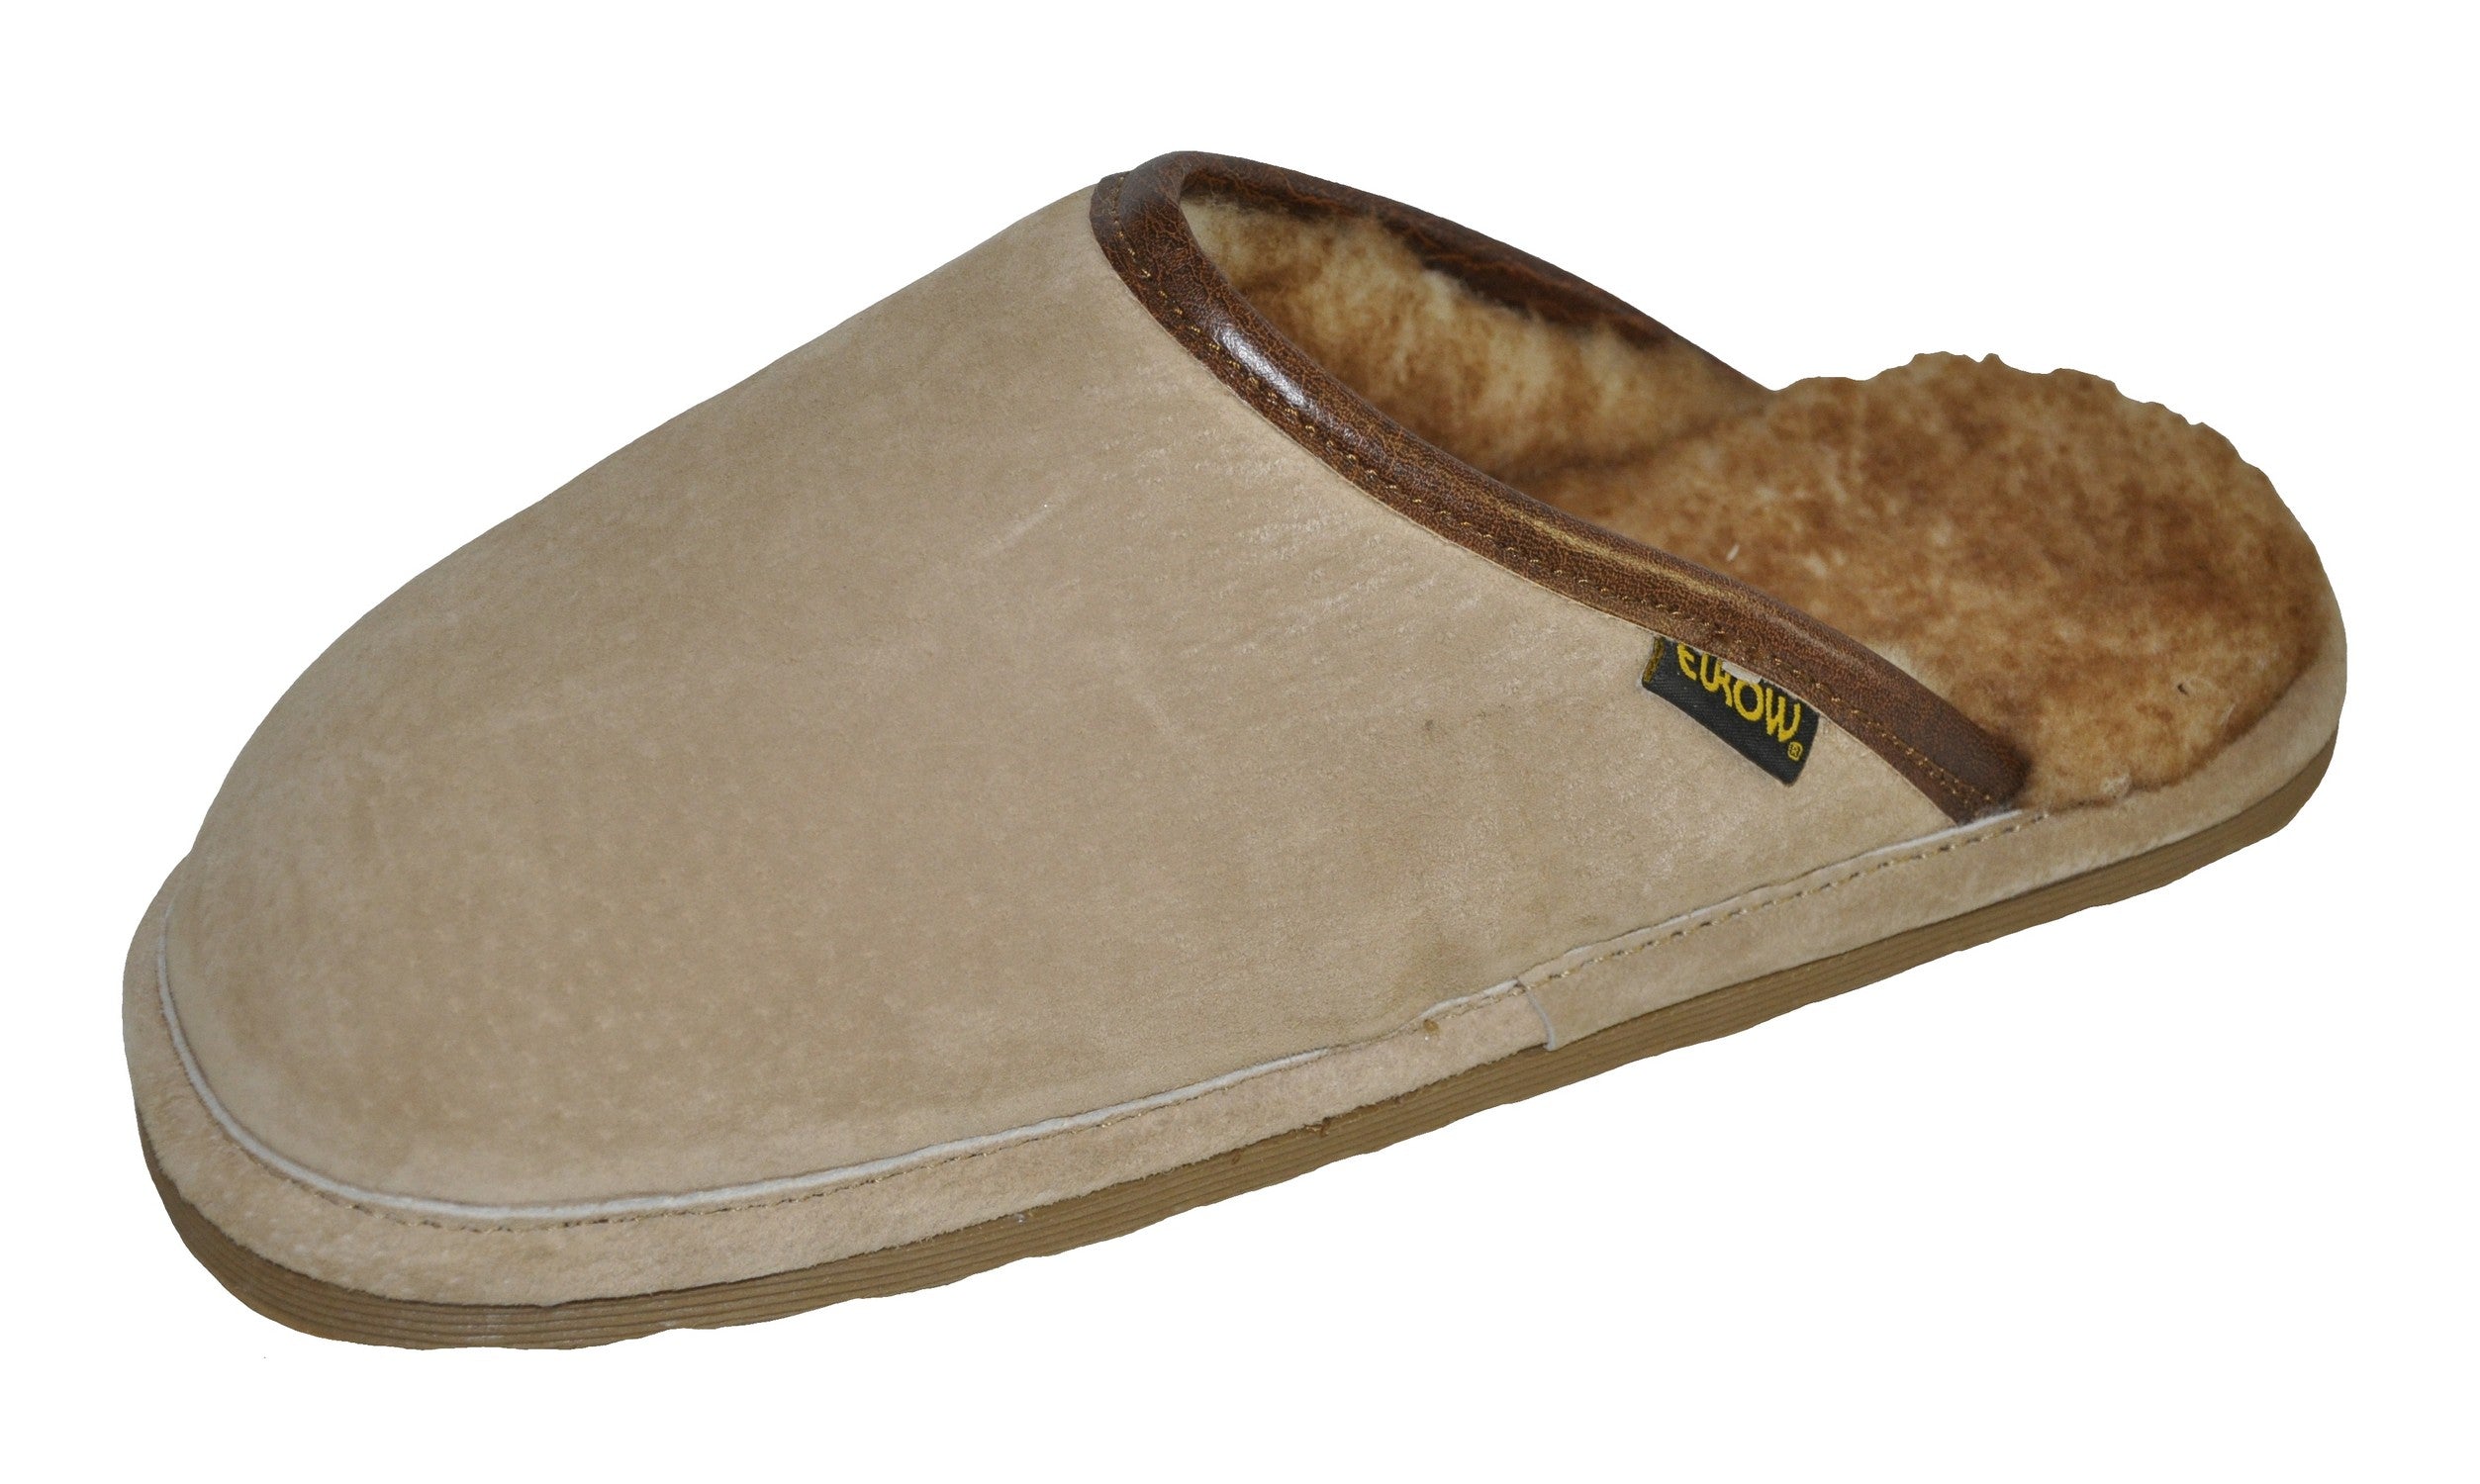 TieFit Men's Slipper||Outdoor Slide Slippers||Anti-Slip Thick Sole|| Thick  Sole Slipper